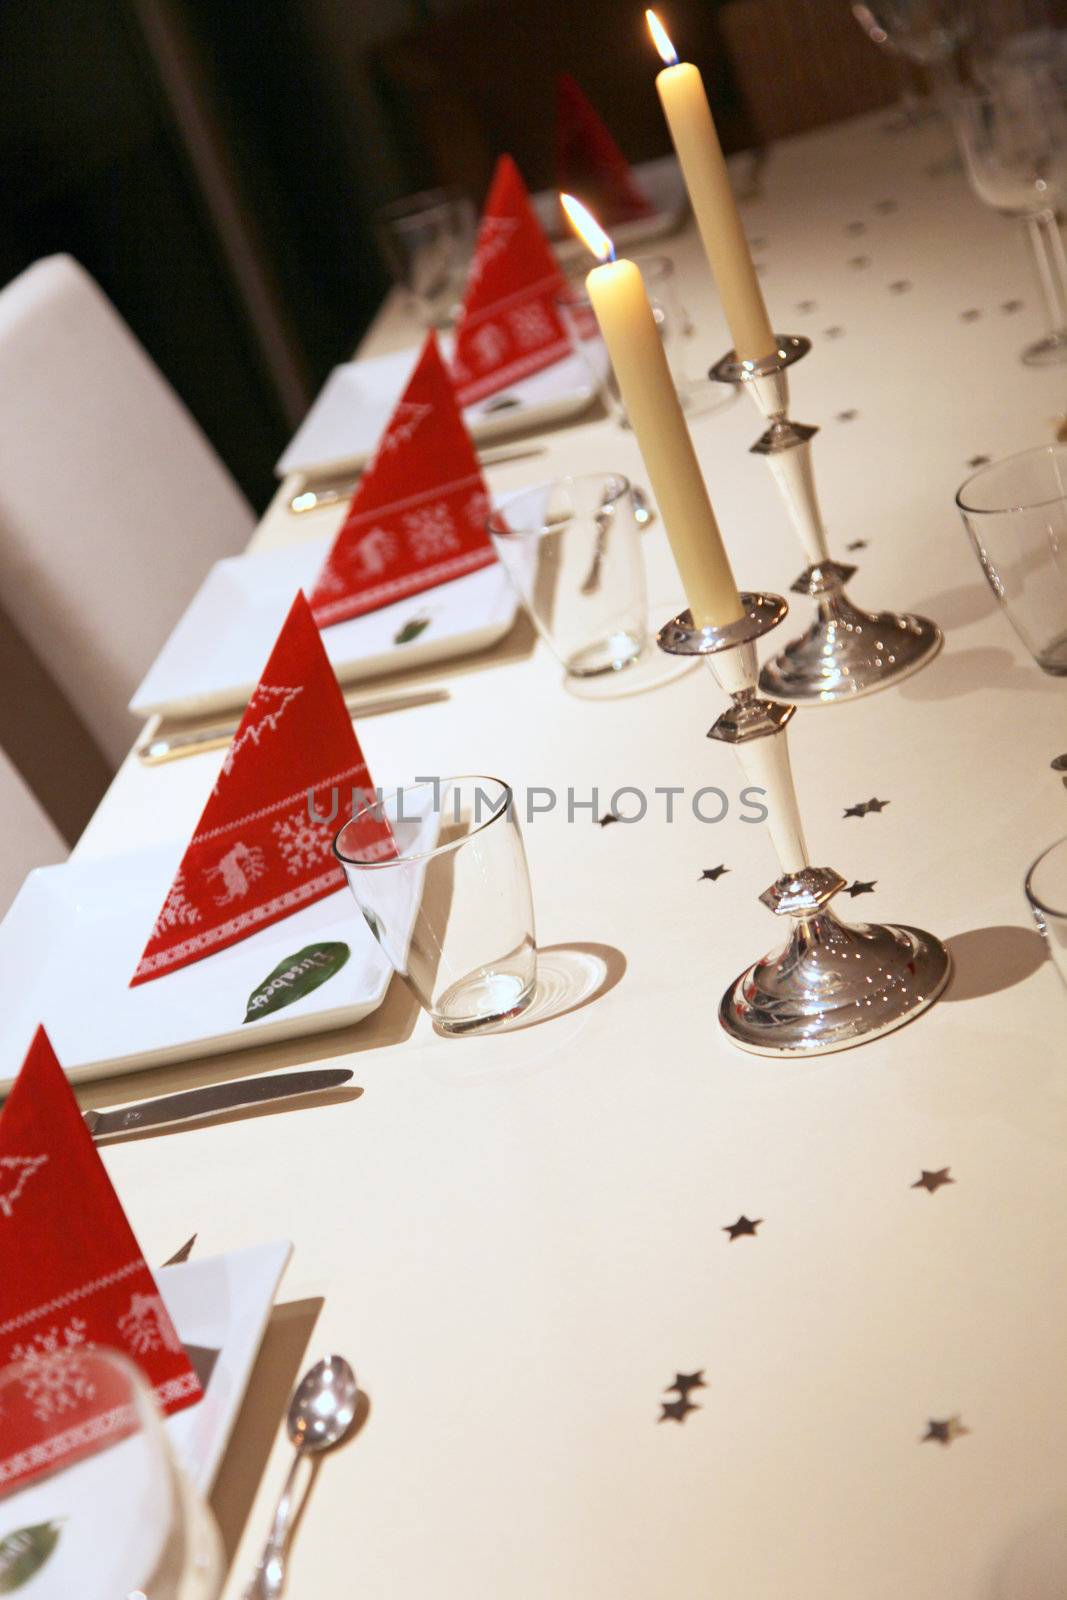 Christmas table decoration  by Farina6000